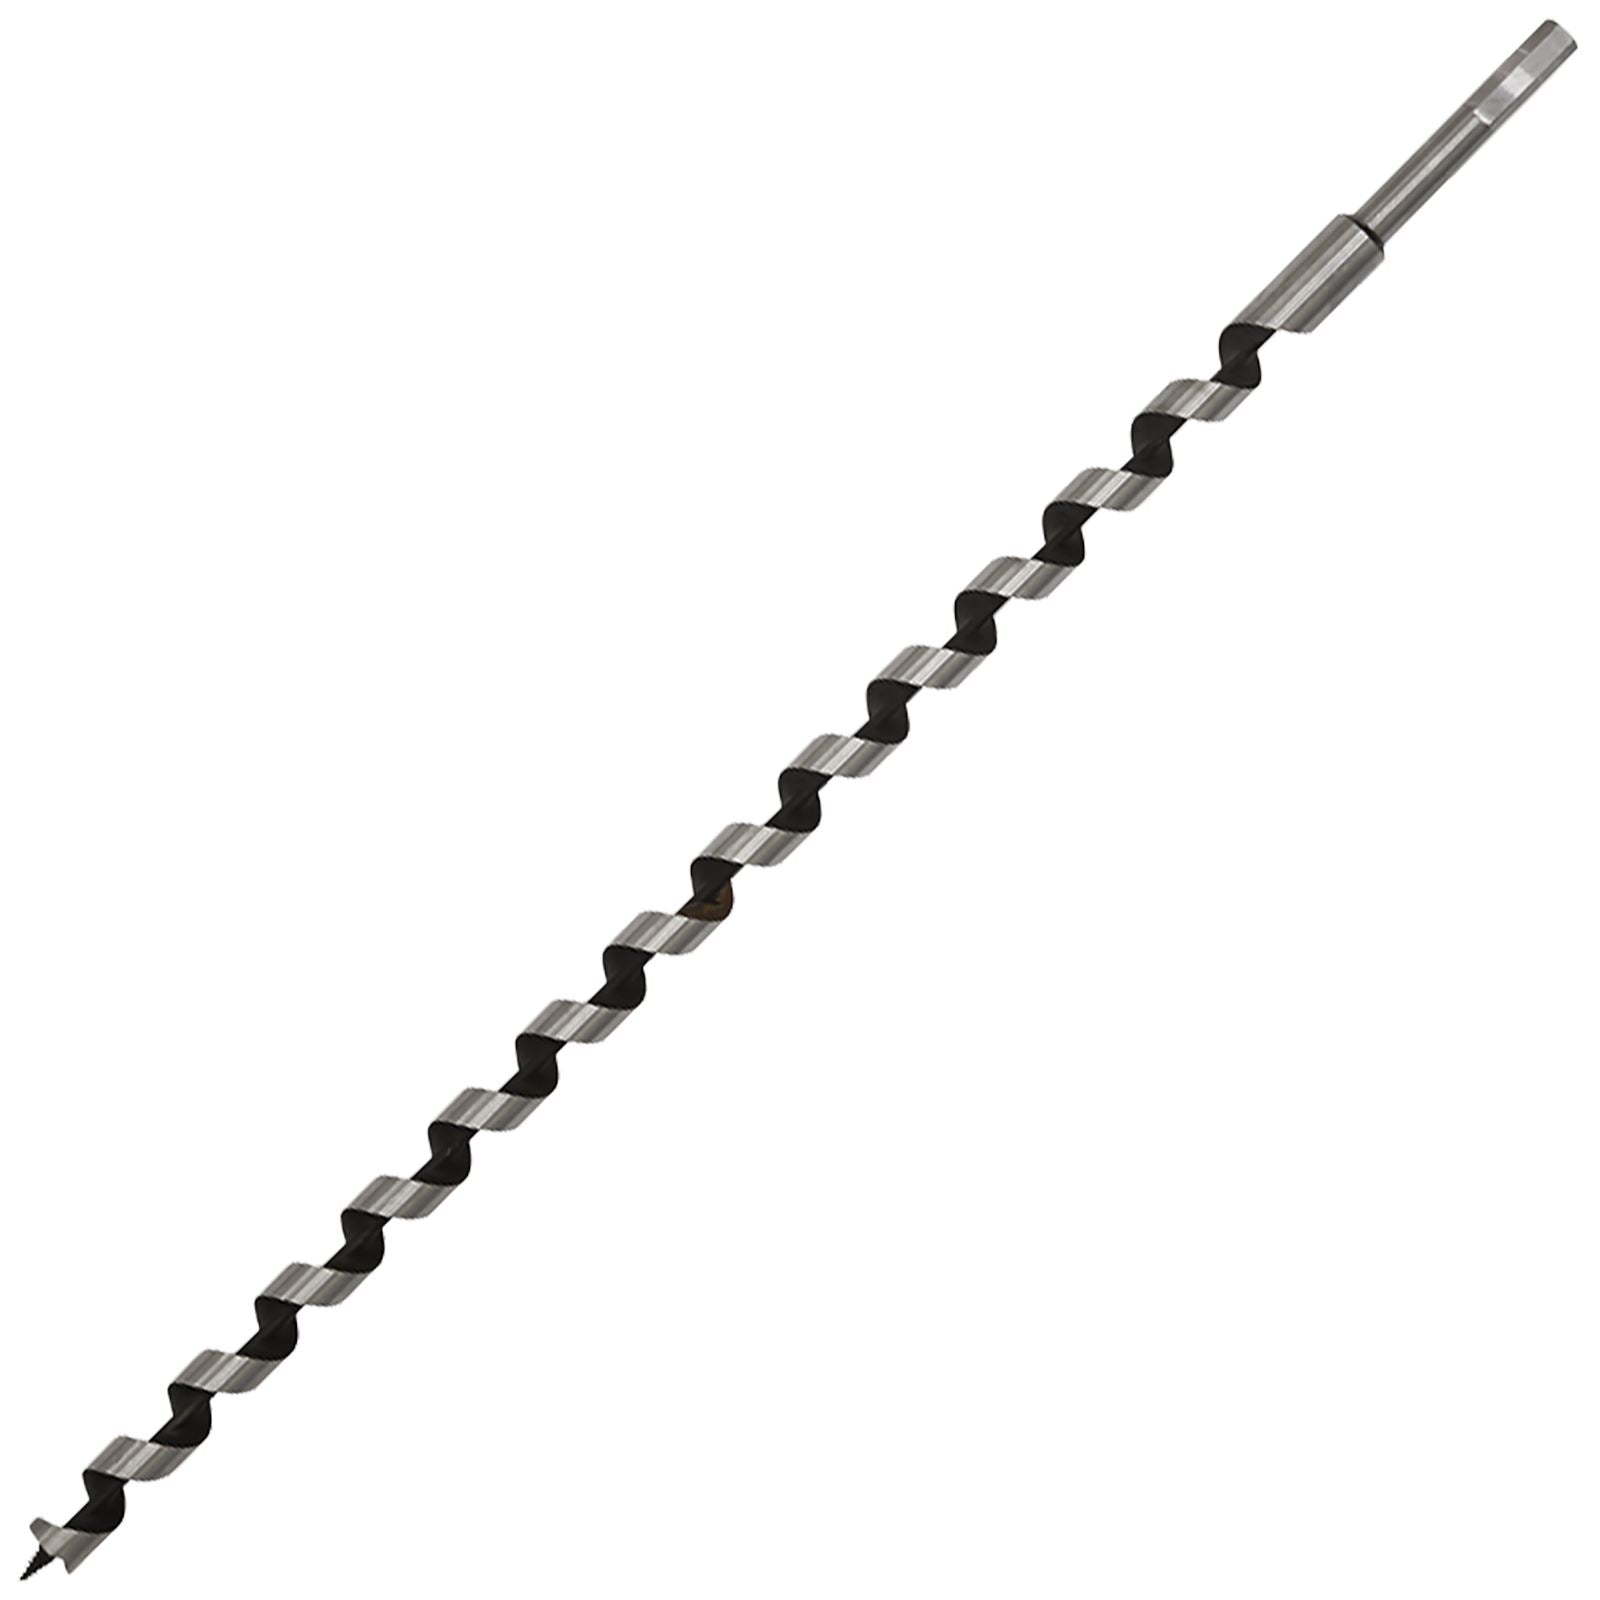 Worksafe by Sealey Auger Wood Drill Bit 18mm x 600mm